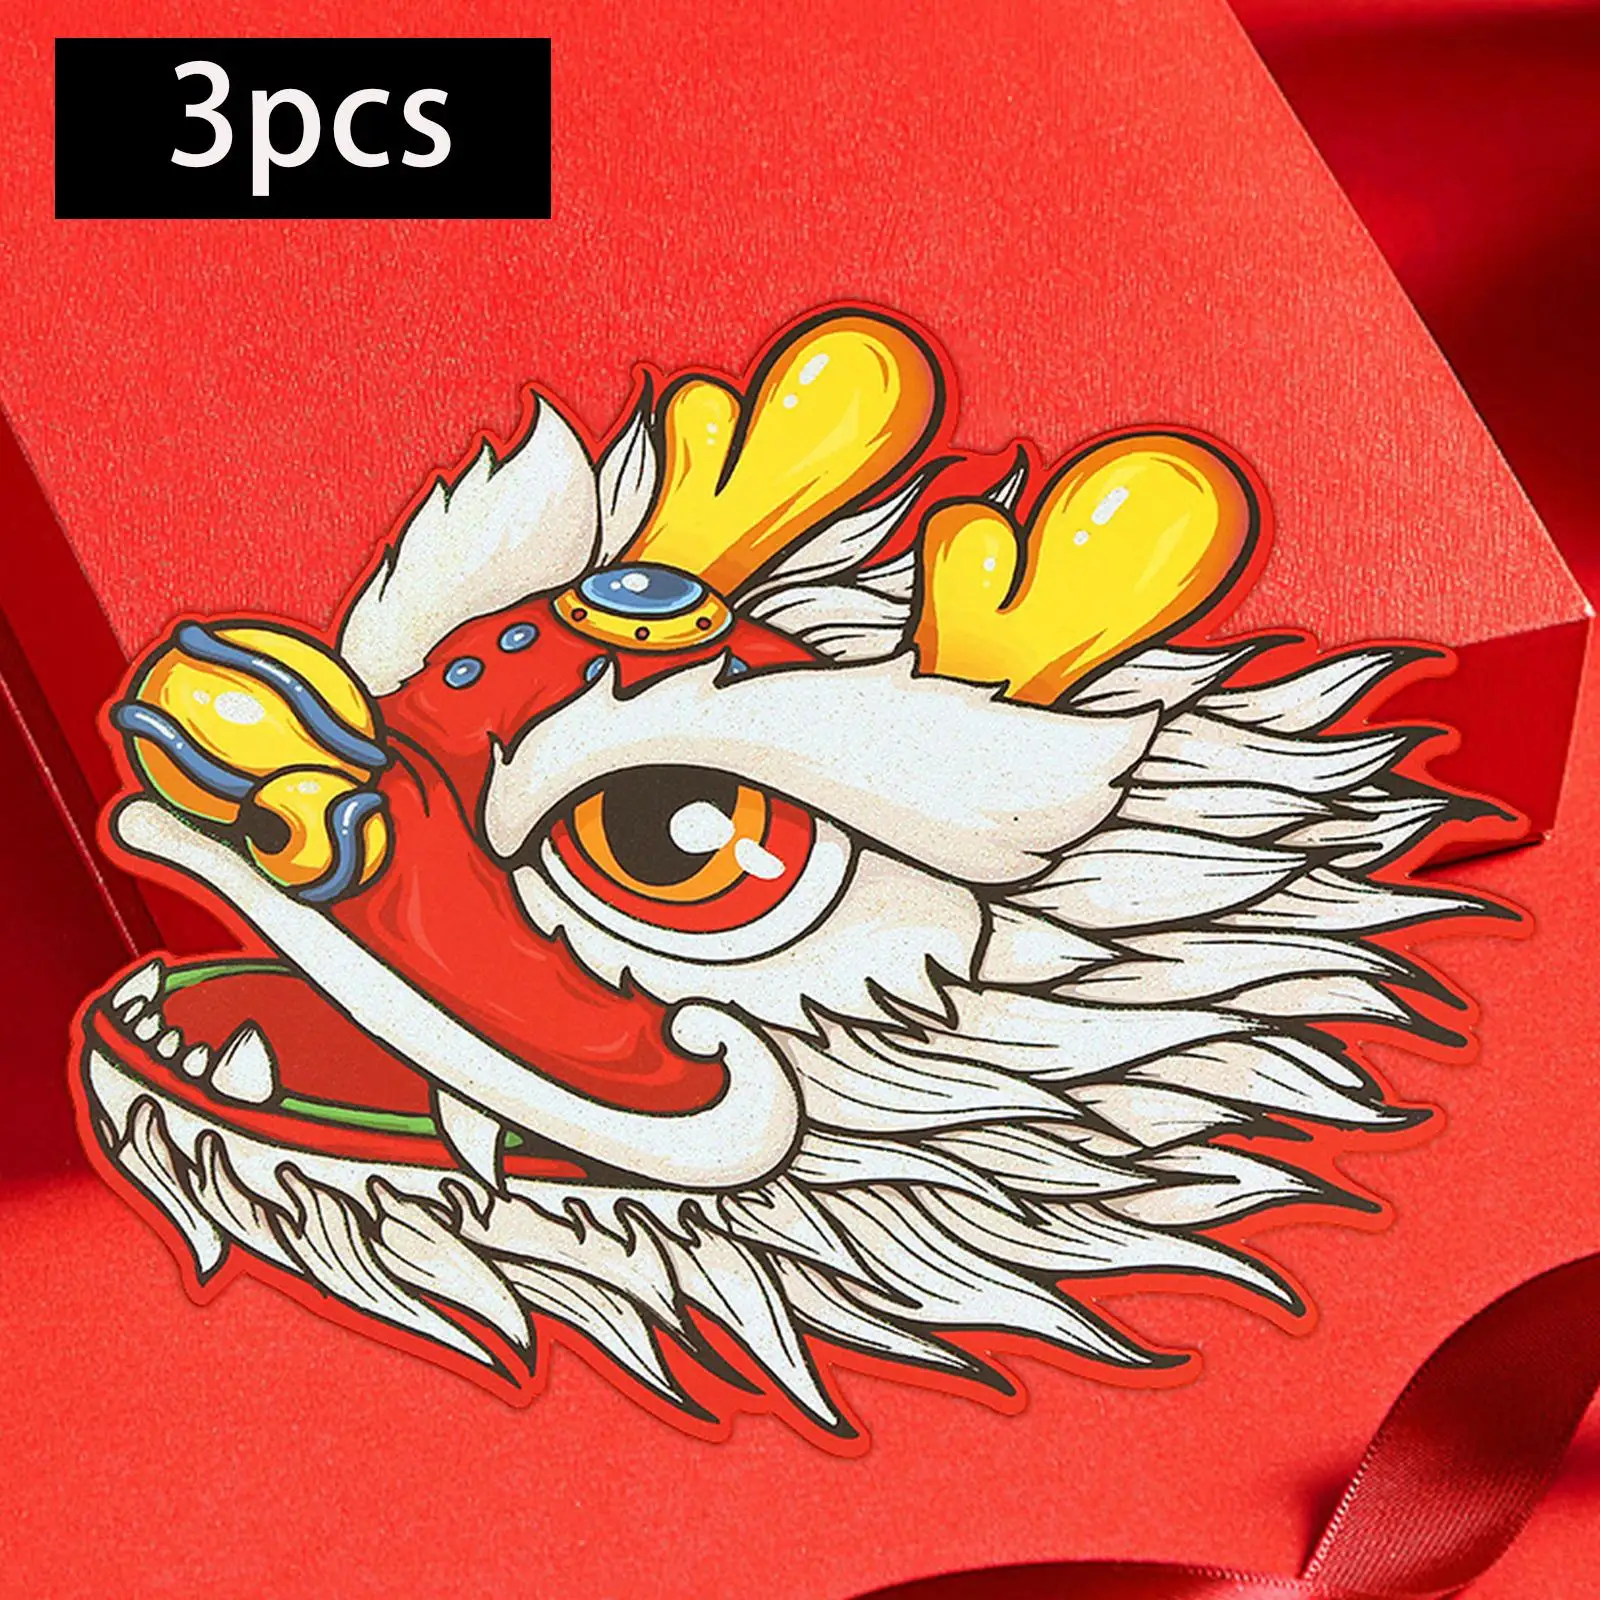 3Pcs New Year Red Packets Spring Festival Red Packet Chinese Lunar Year Red Envelopes Lucky Red Envelopes Traditional Red Pocket